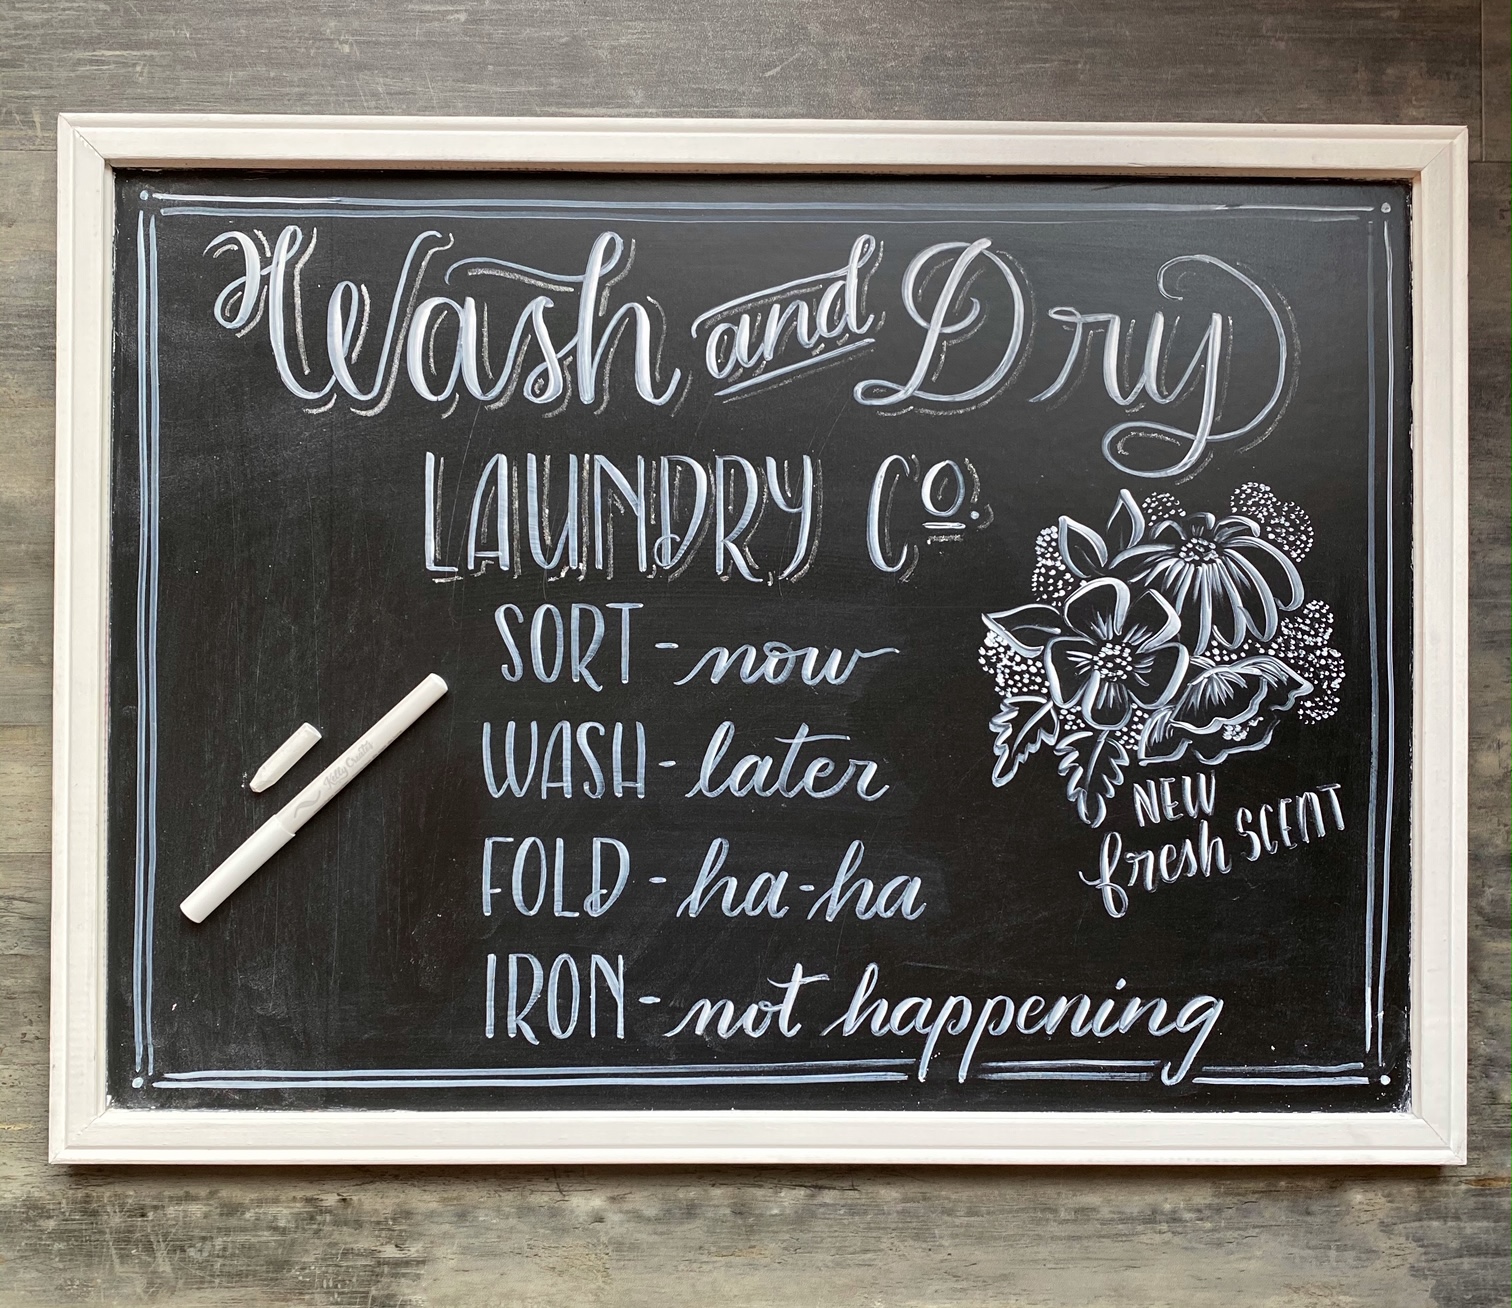 Chalkboard Lettering With a White Brush Pen – Kelly Creates